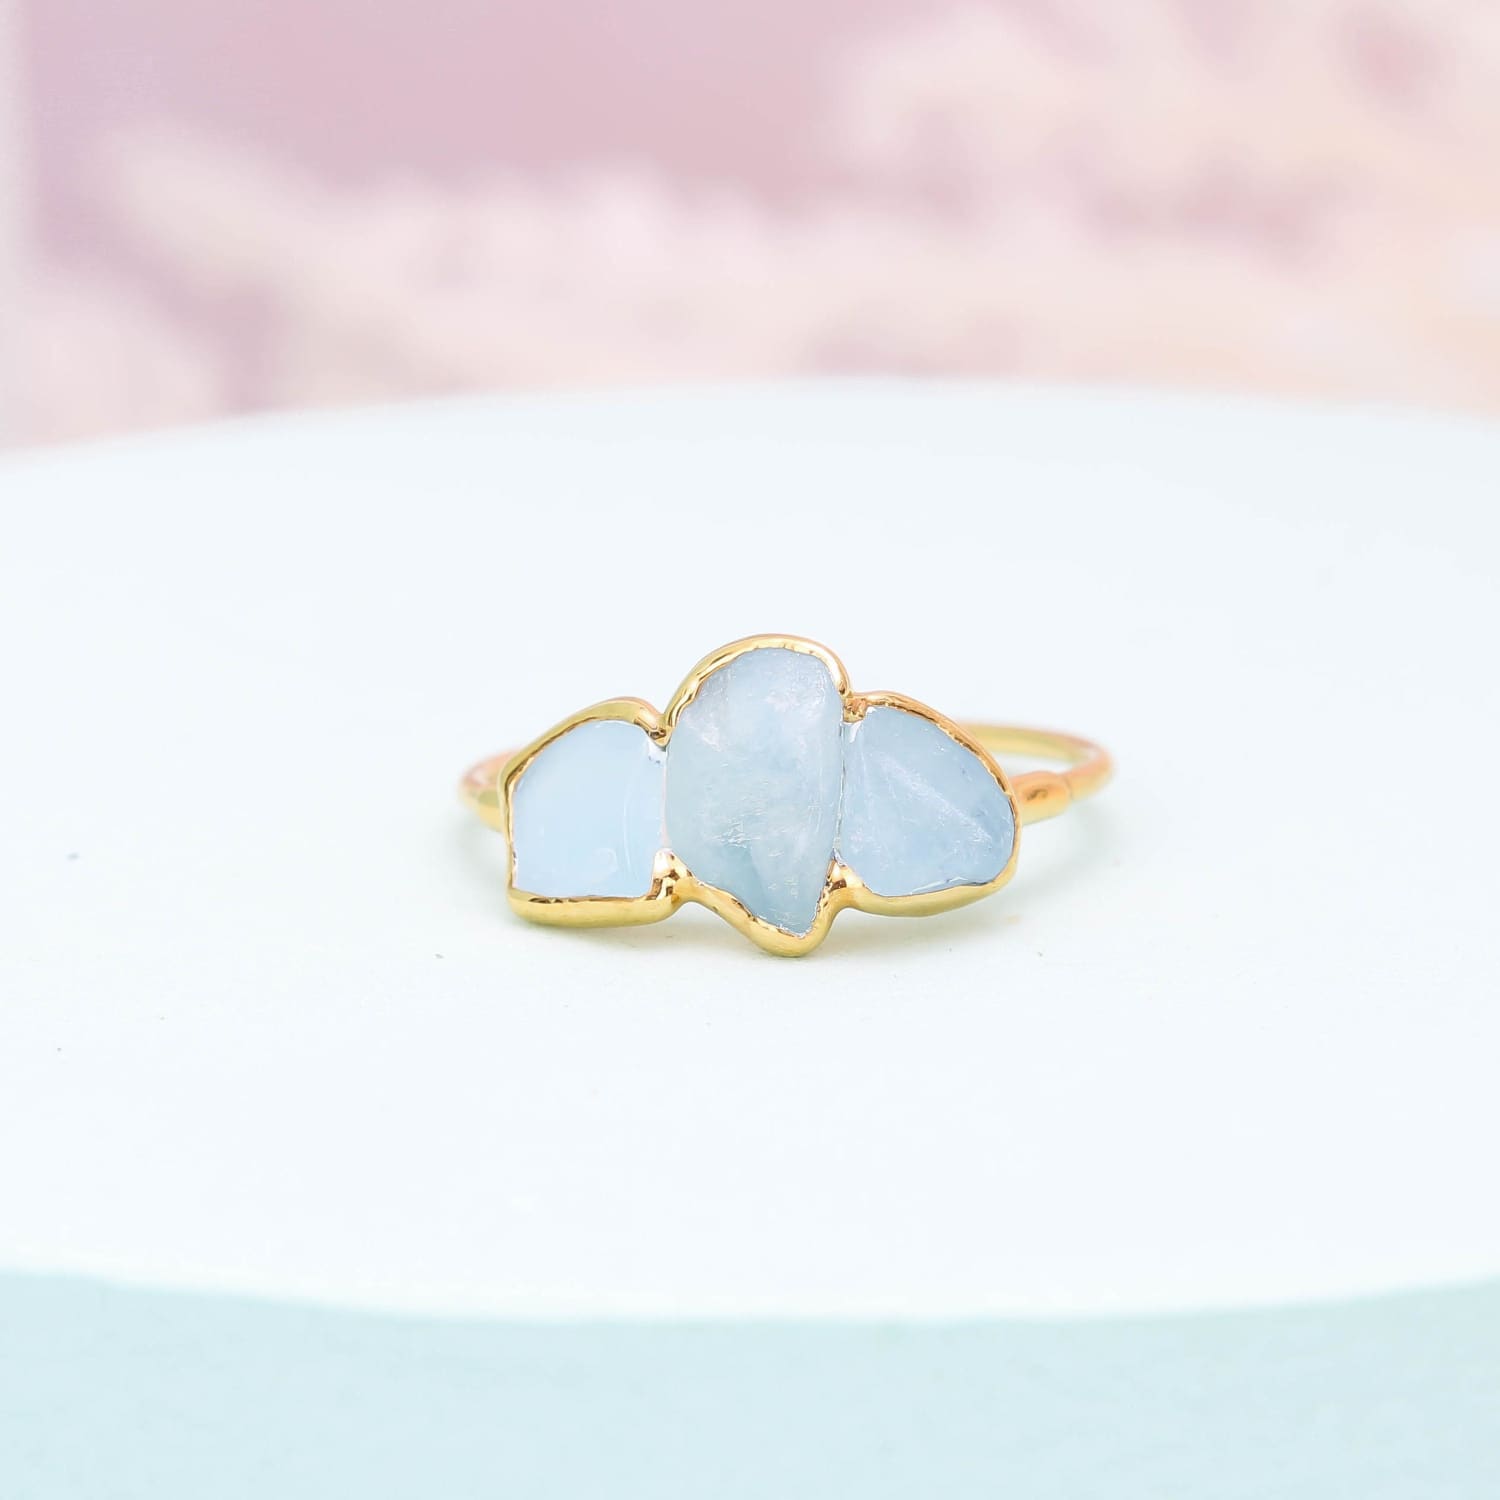 Triple Raw Aquamarine Ring for Women Gold Dainty Delicate